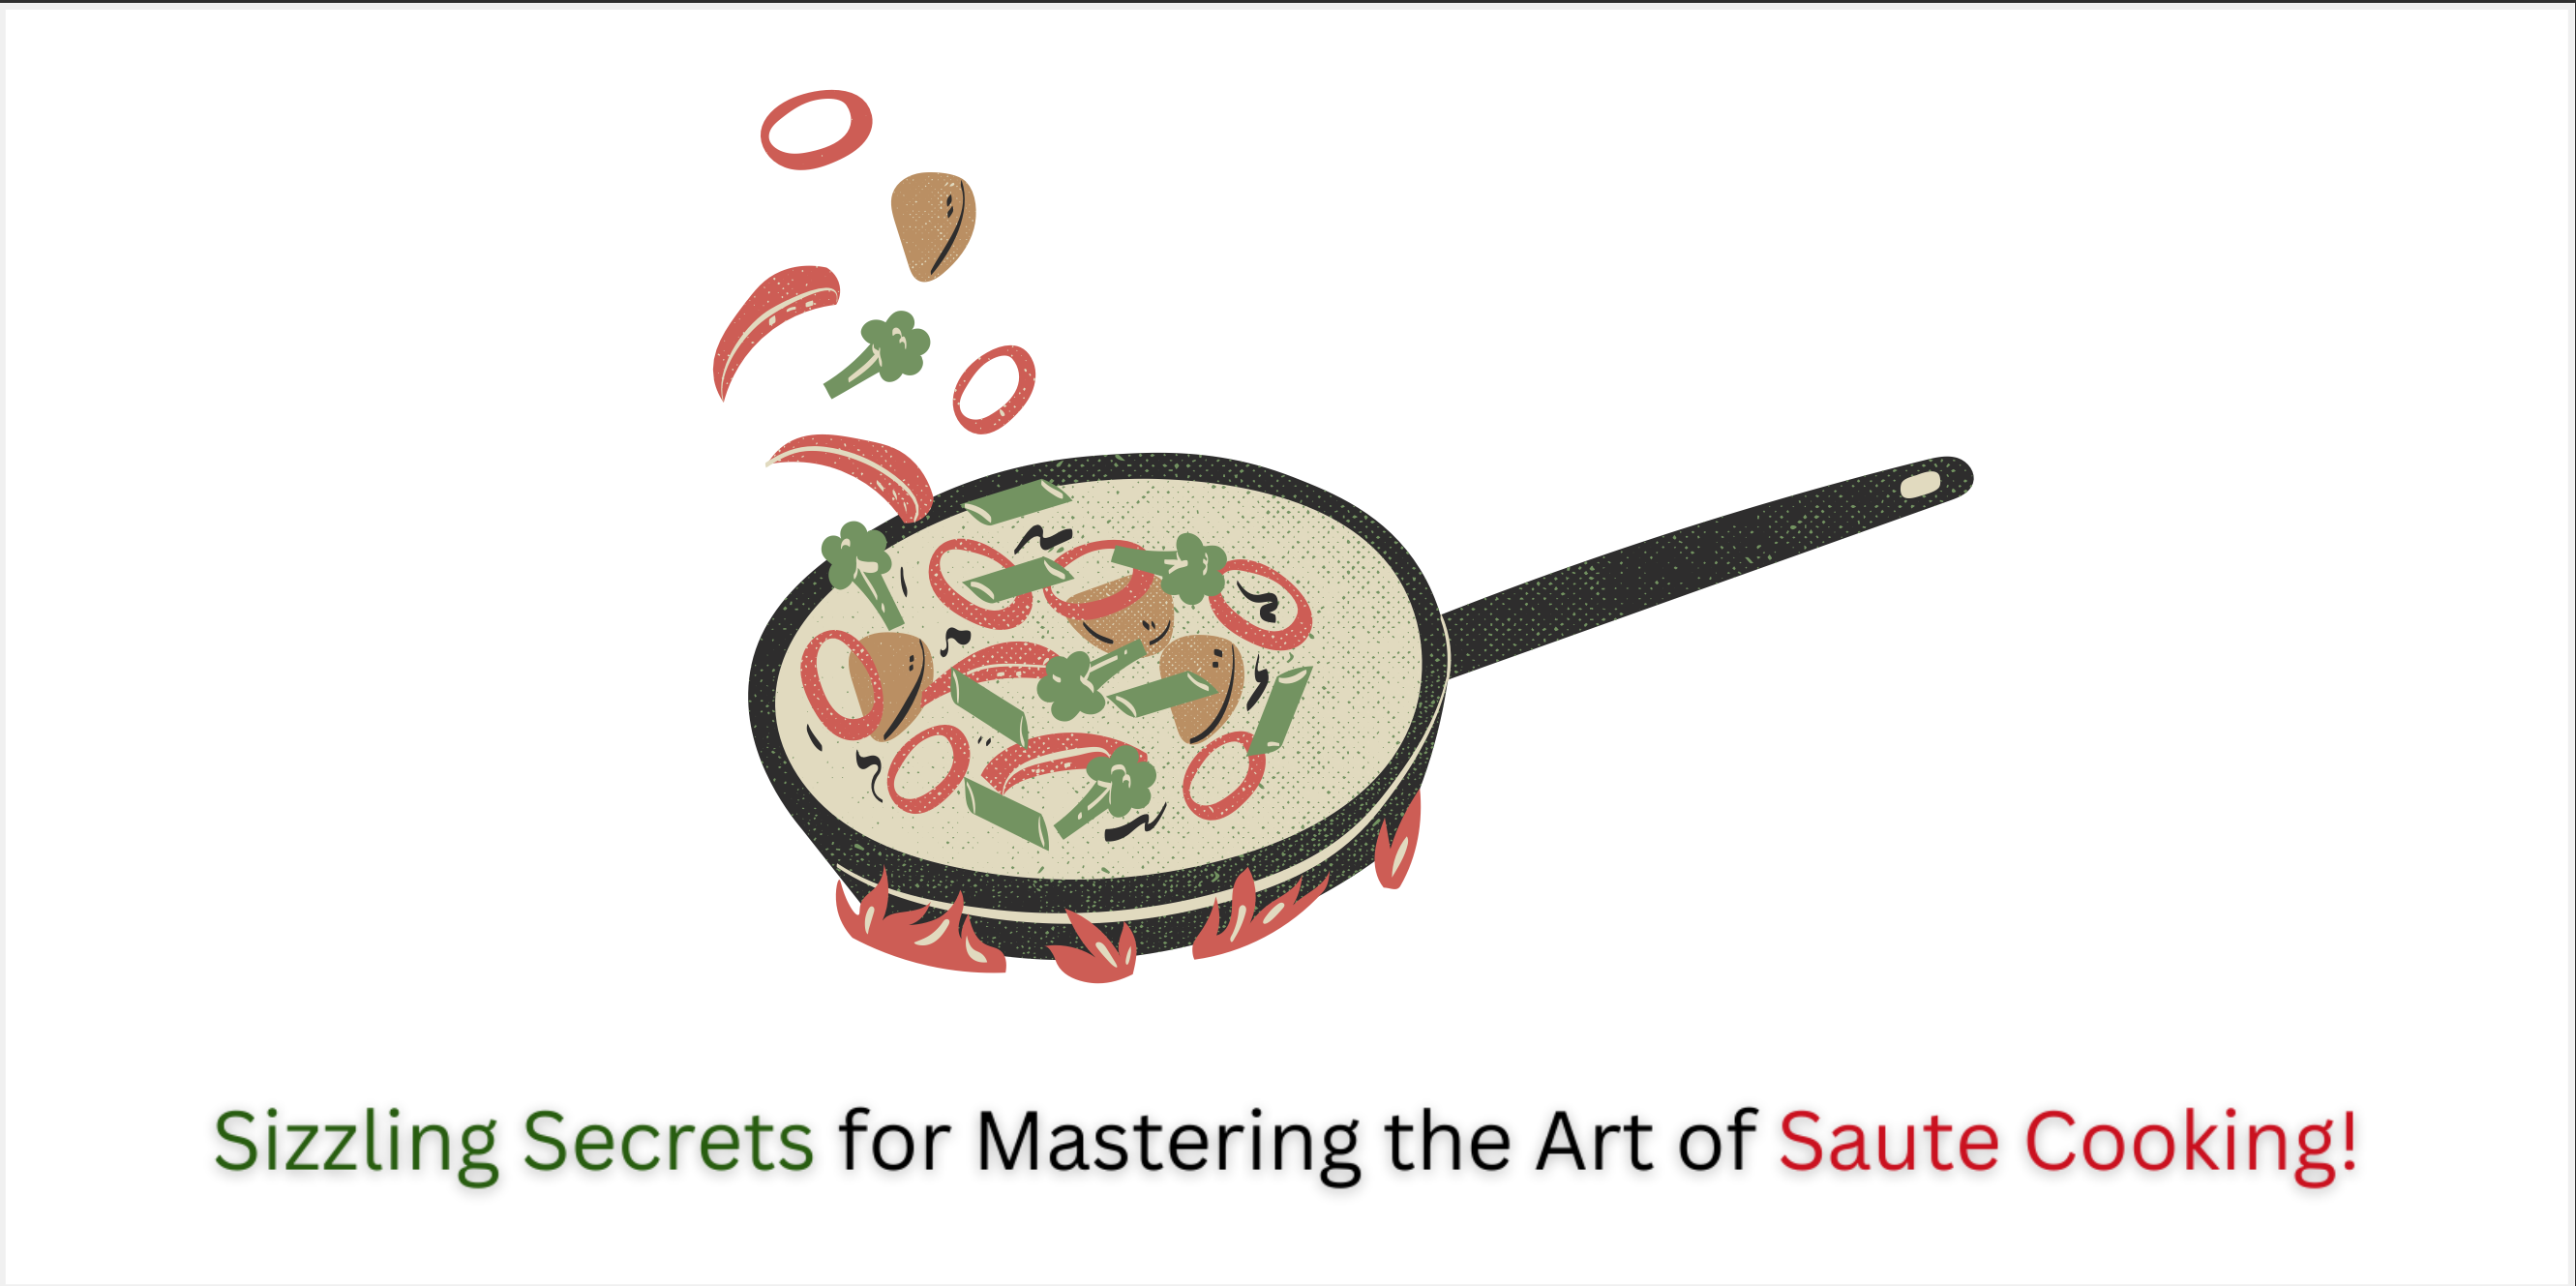 Sizzling Secrets for Mastering the Art of Saute Cooking